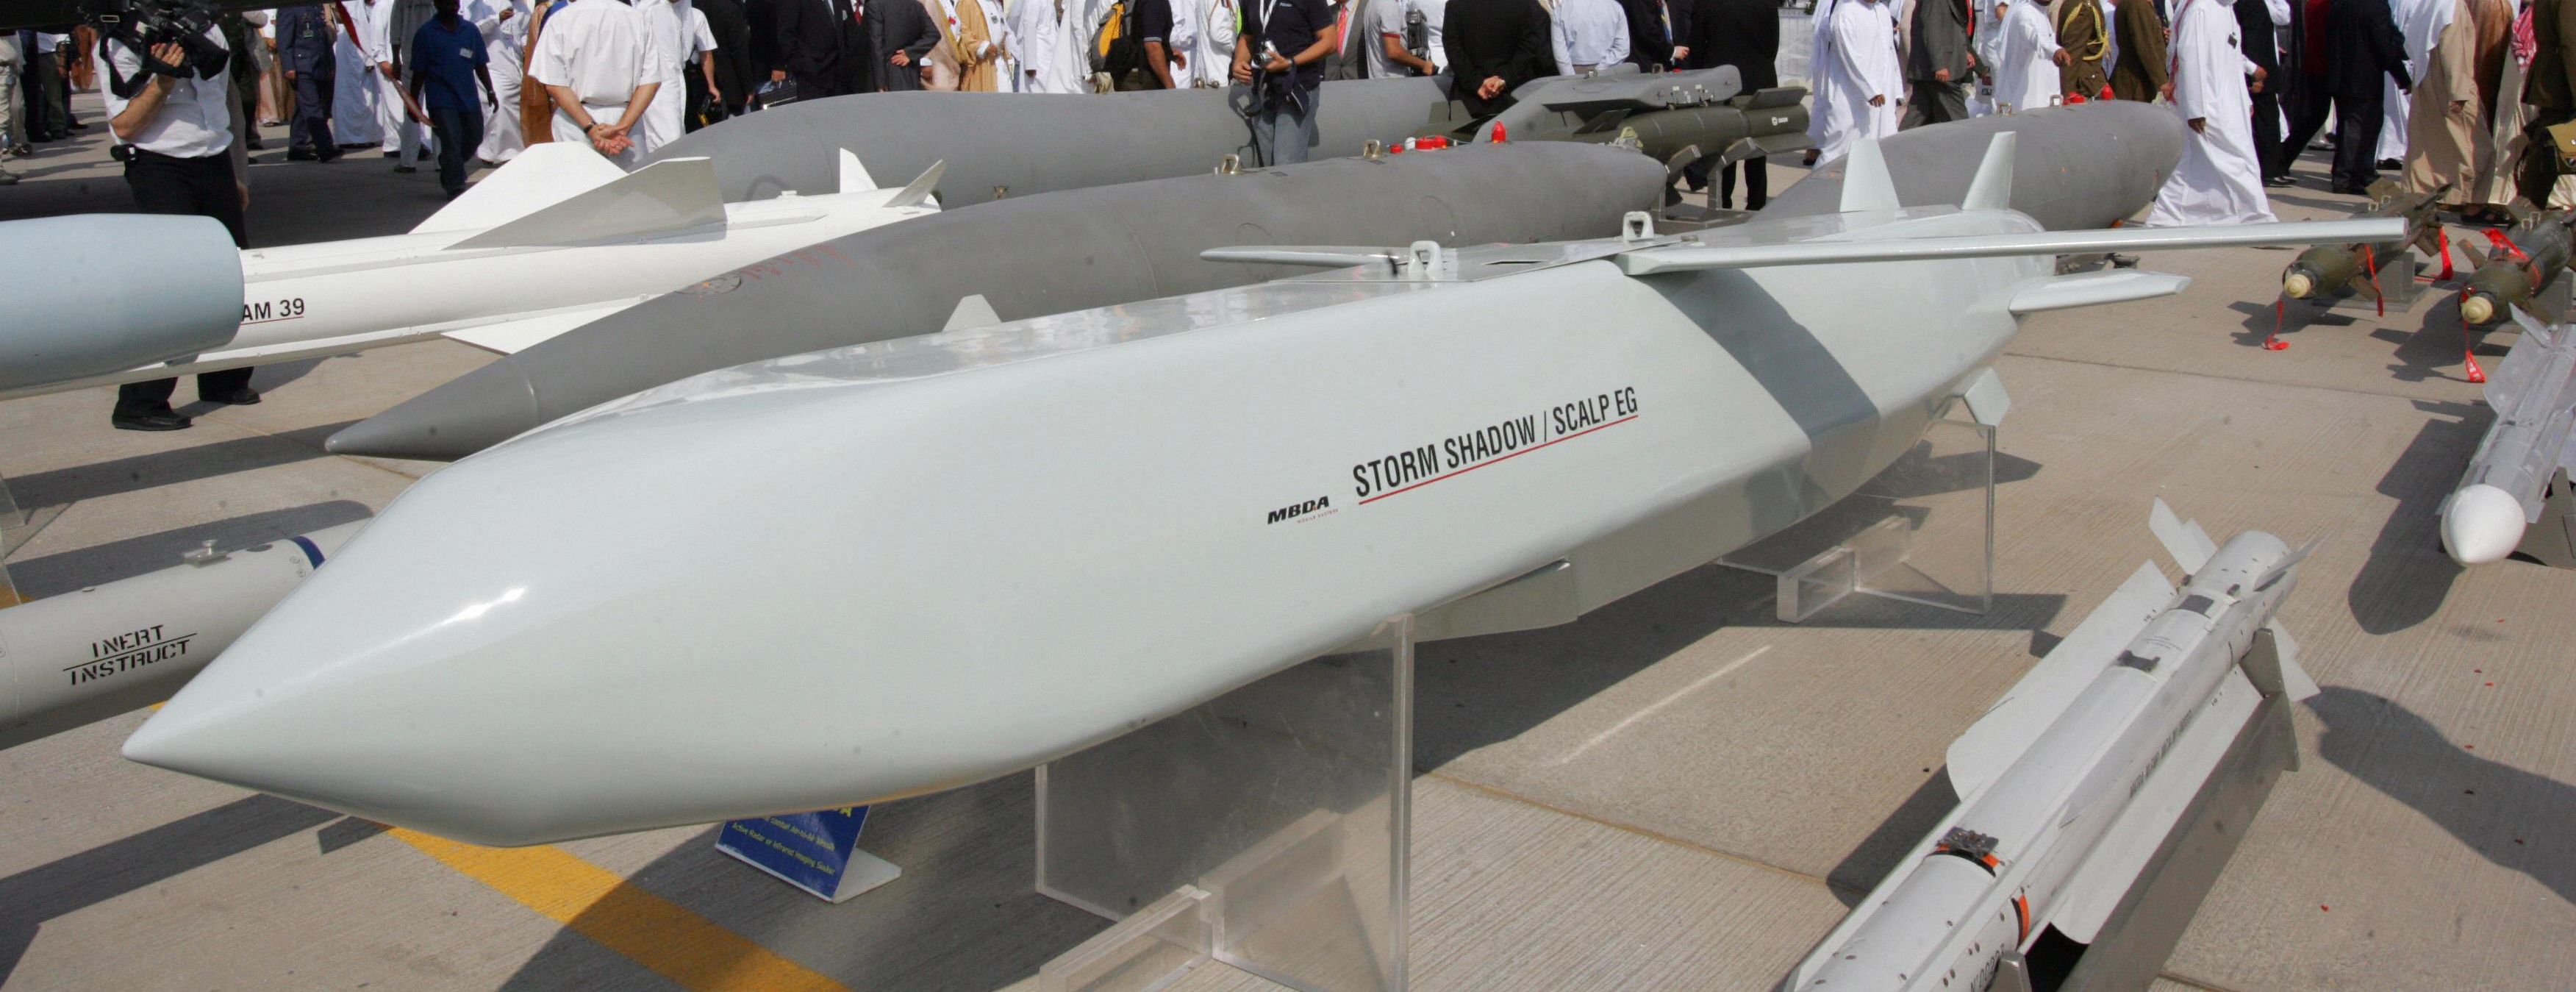 230228181659-storm-shadow-cruise-missile-022823.jpg